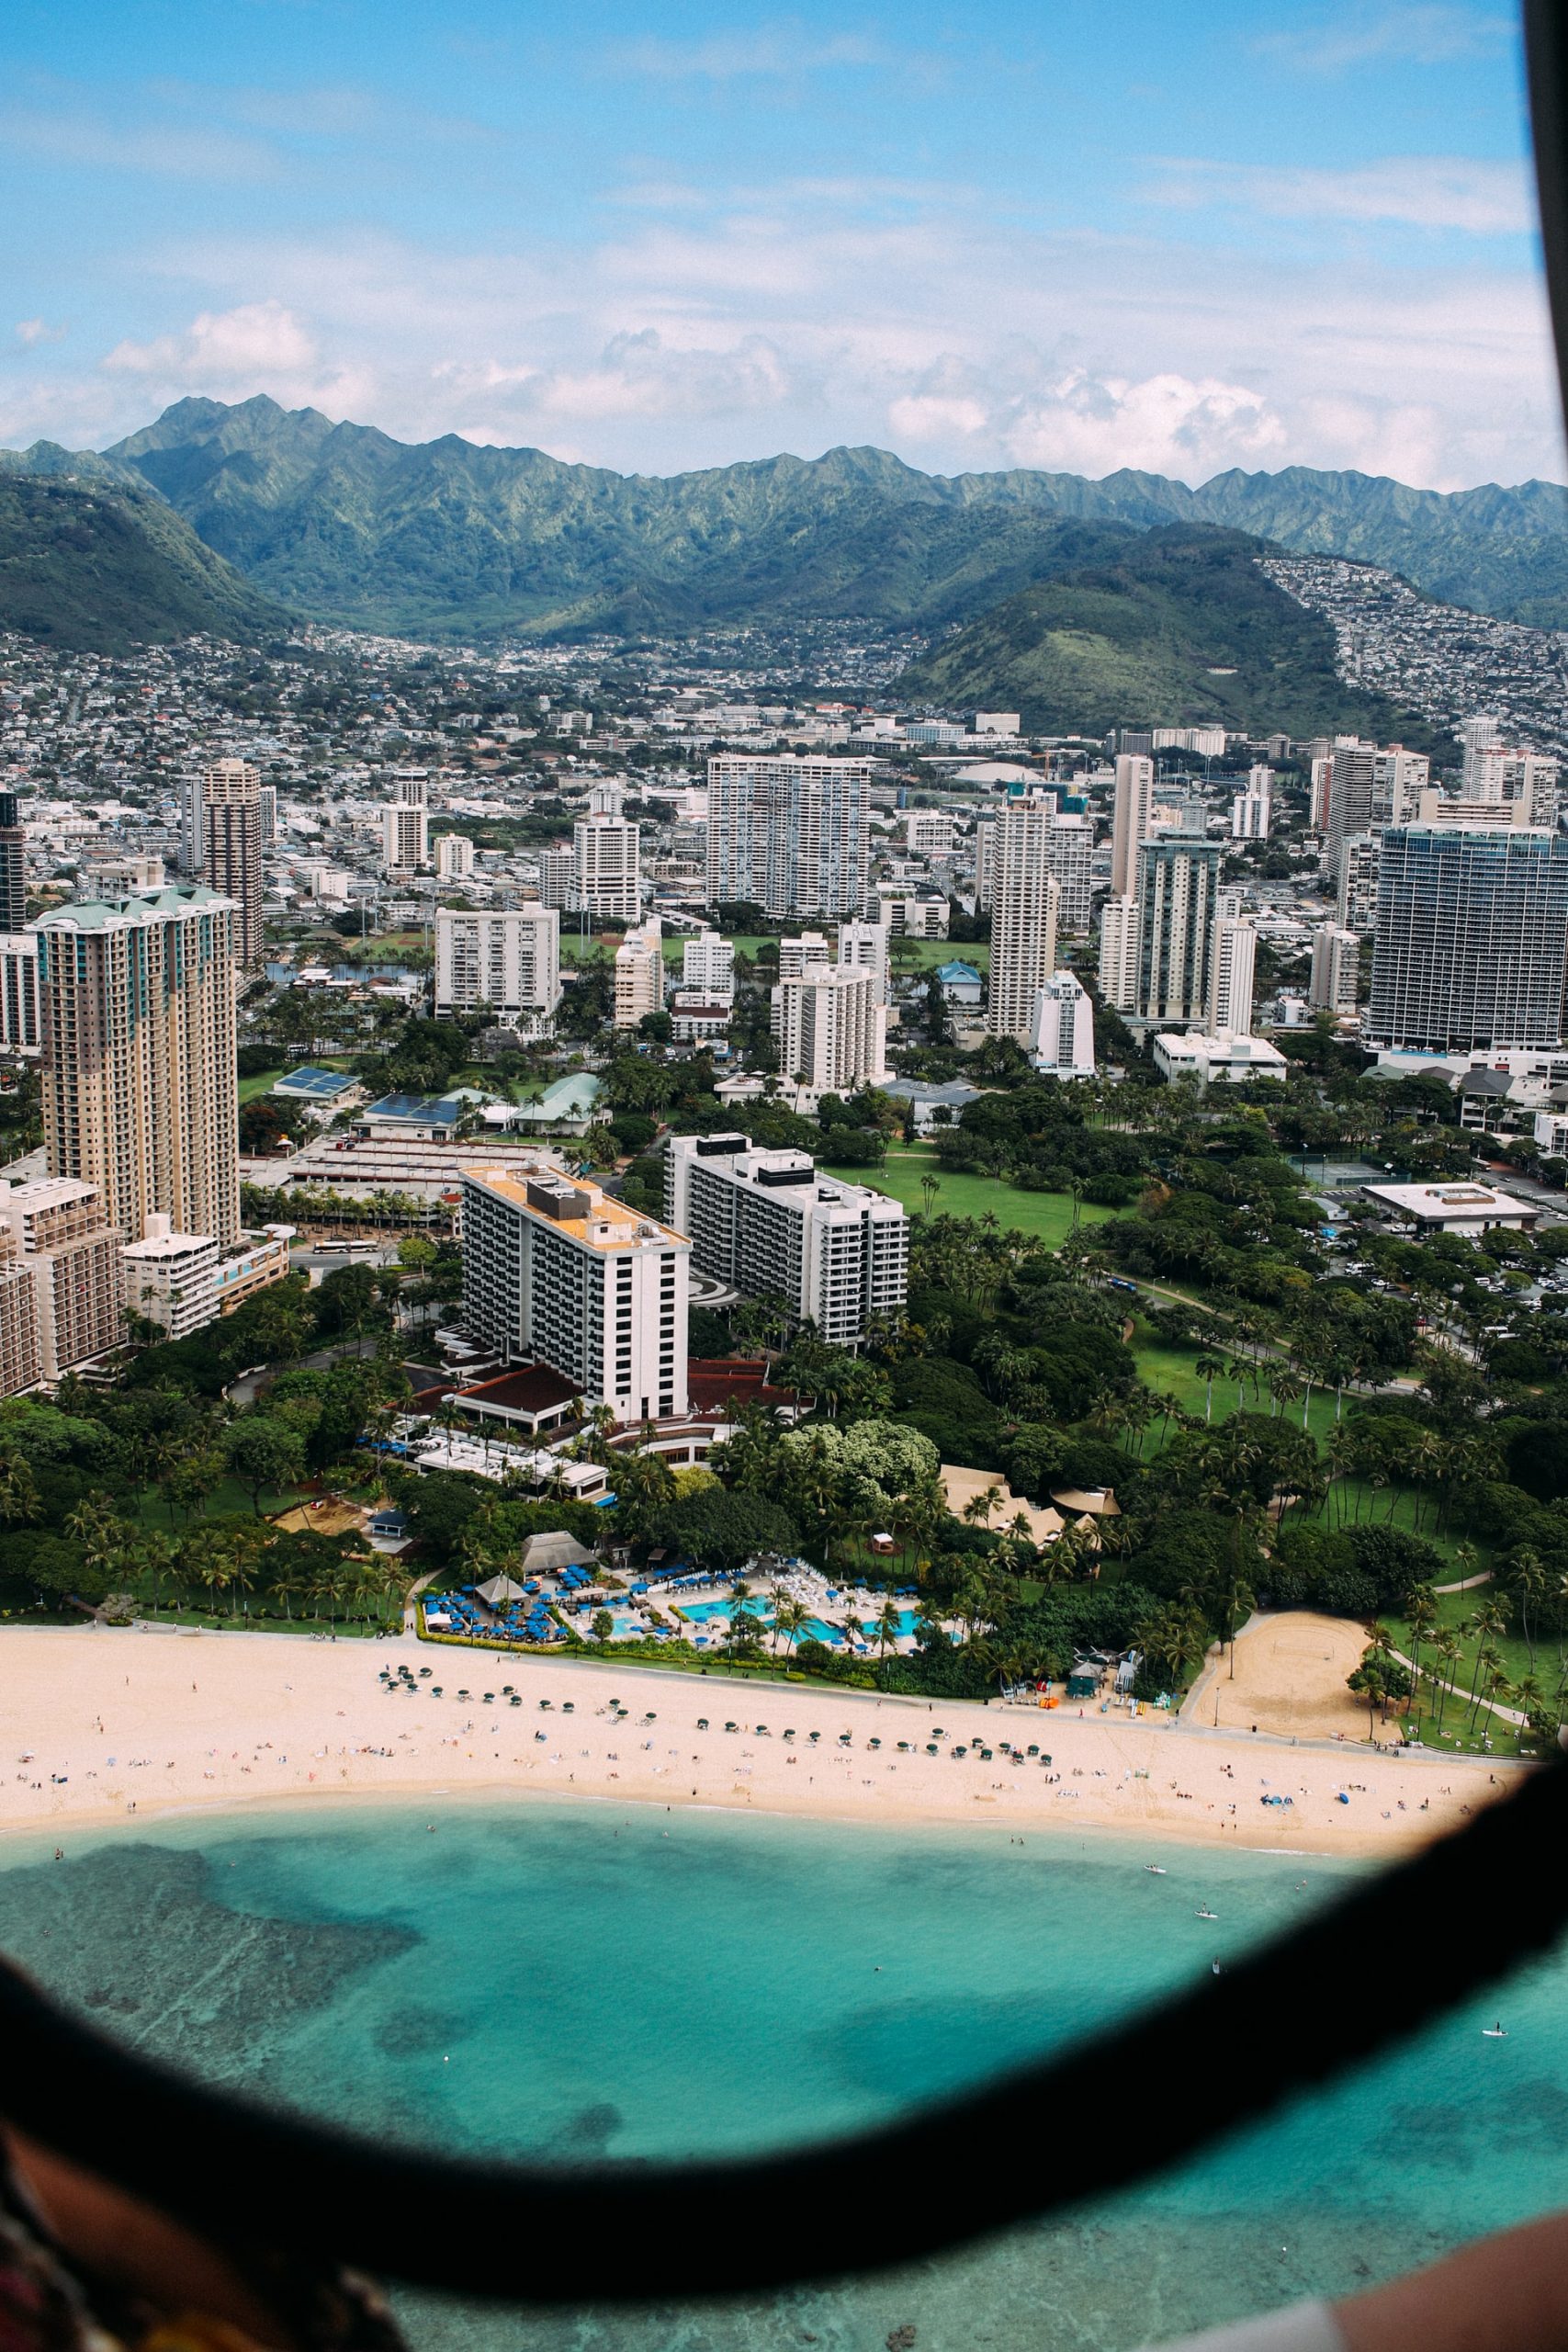 A view of the turquoise beach in Waikiki